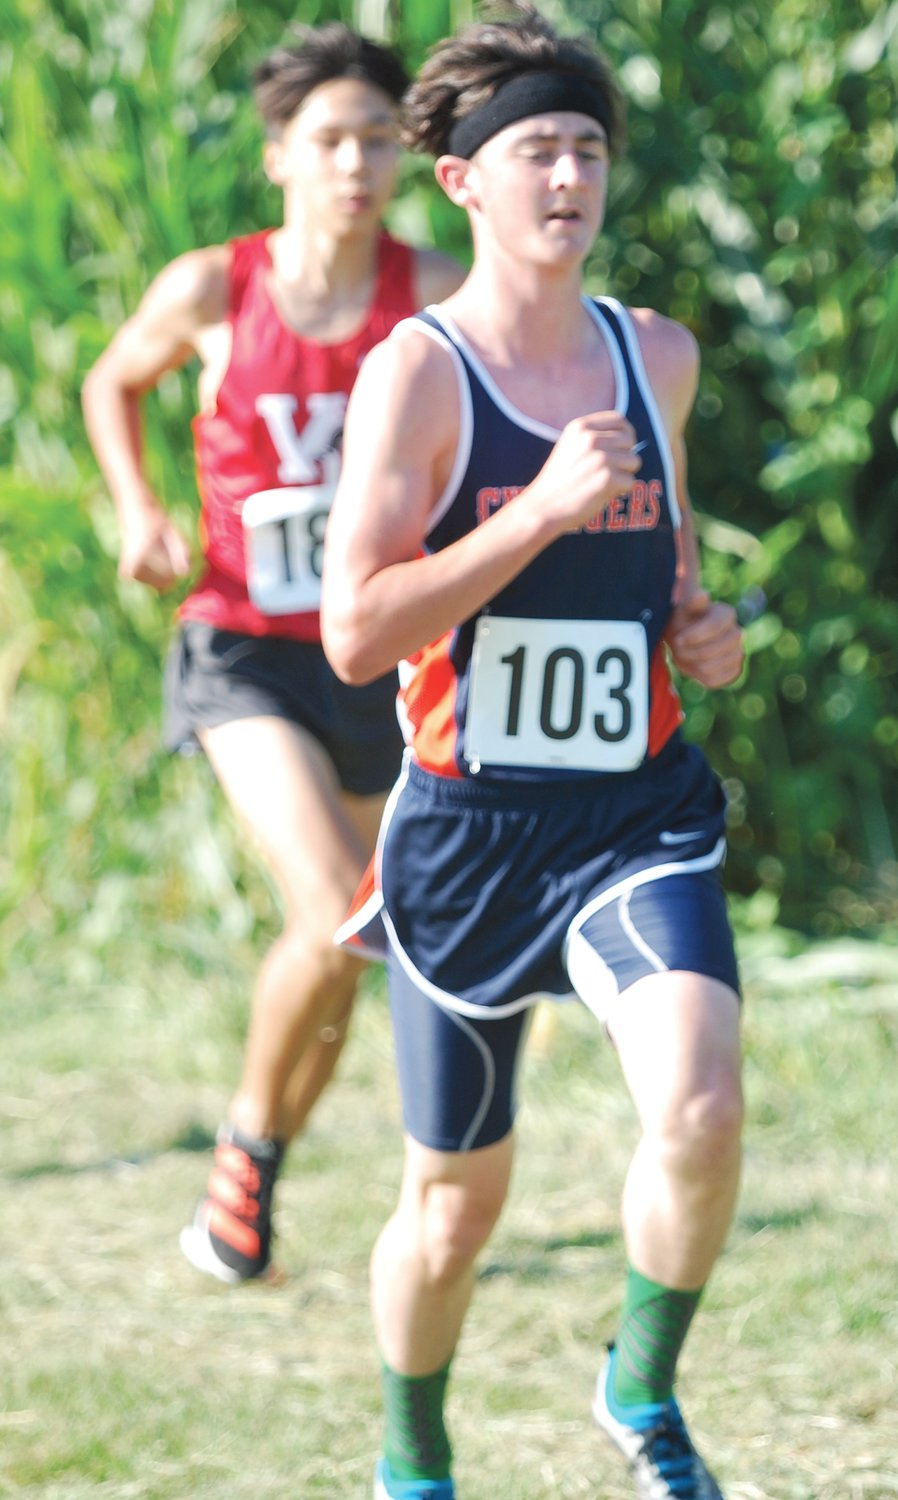 North Montgomery’s Elijah McCartney is the top returning runner for the Chargers this season.